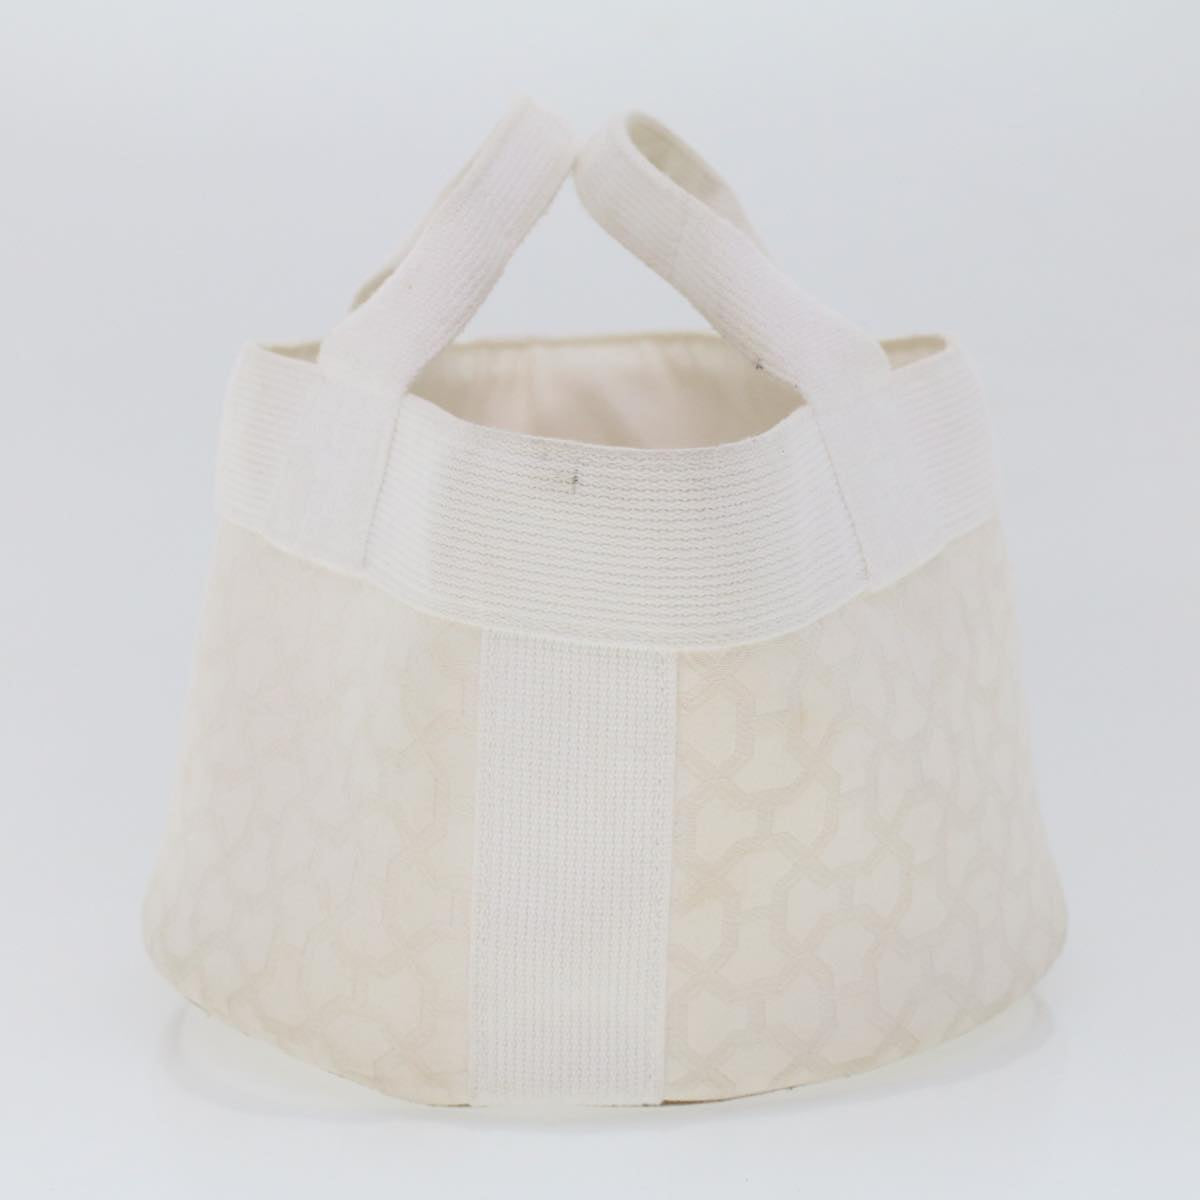 HERMES Hand Bag Canvas White Auth bs5448